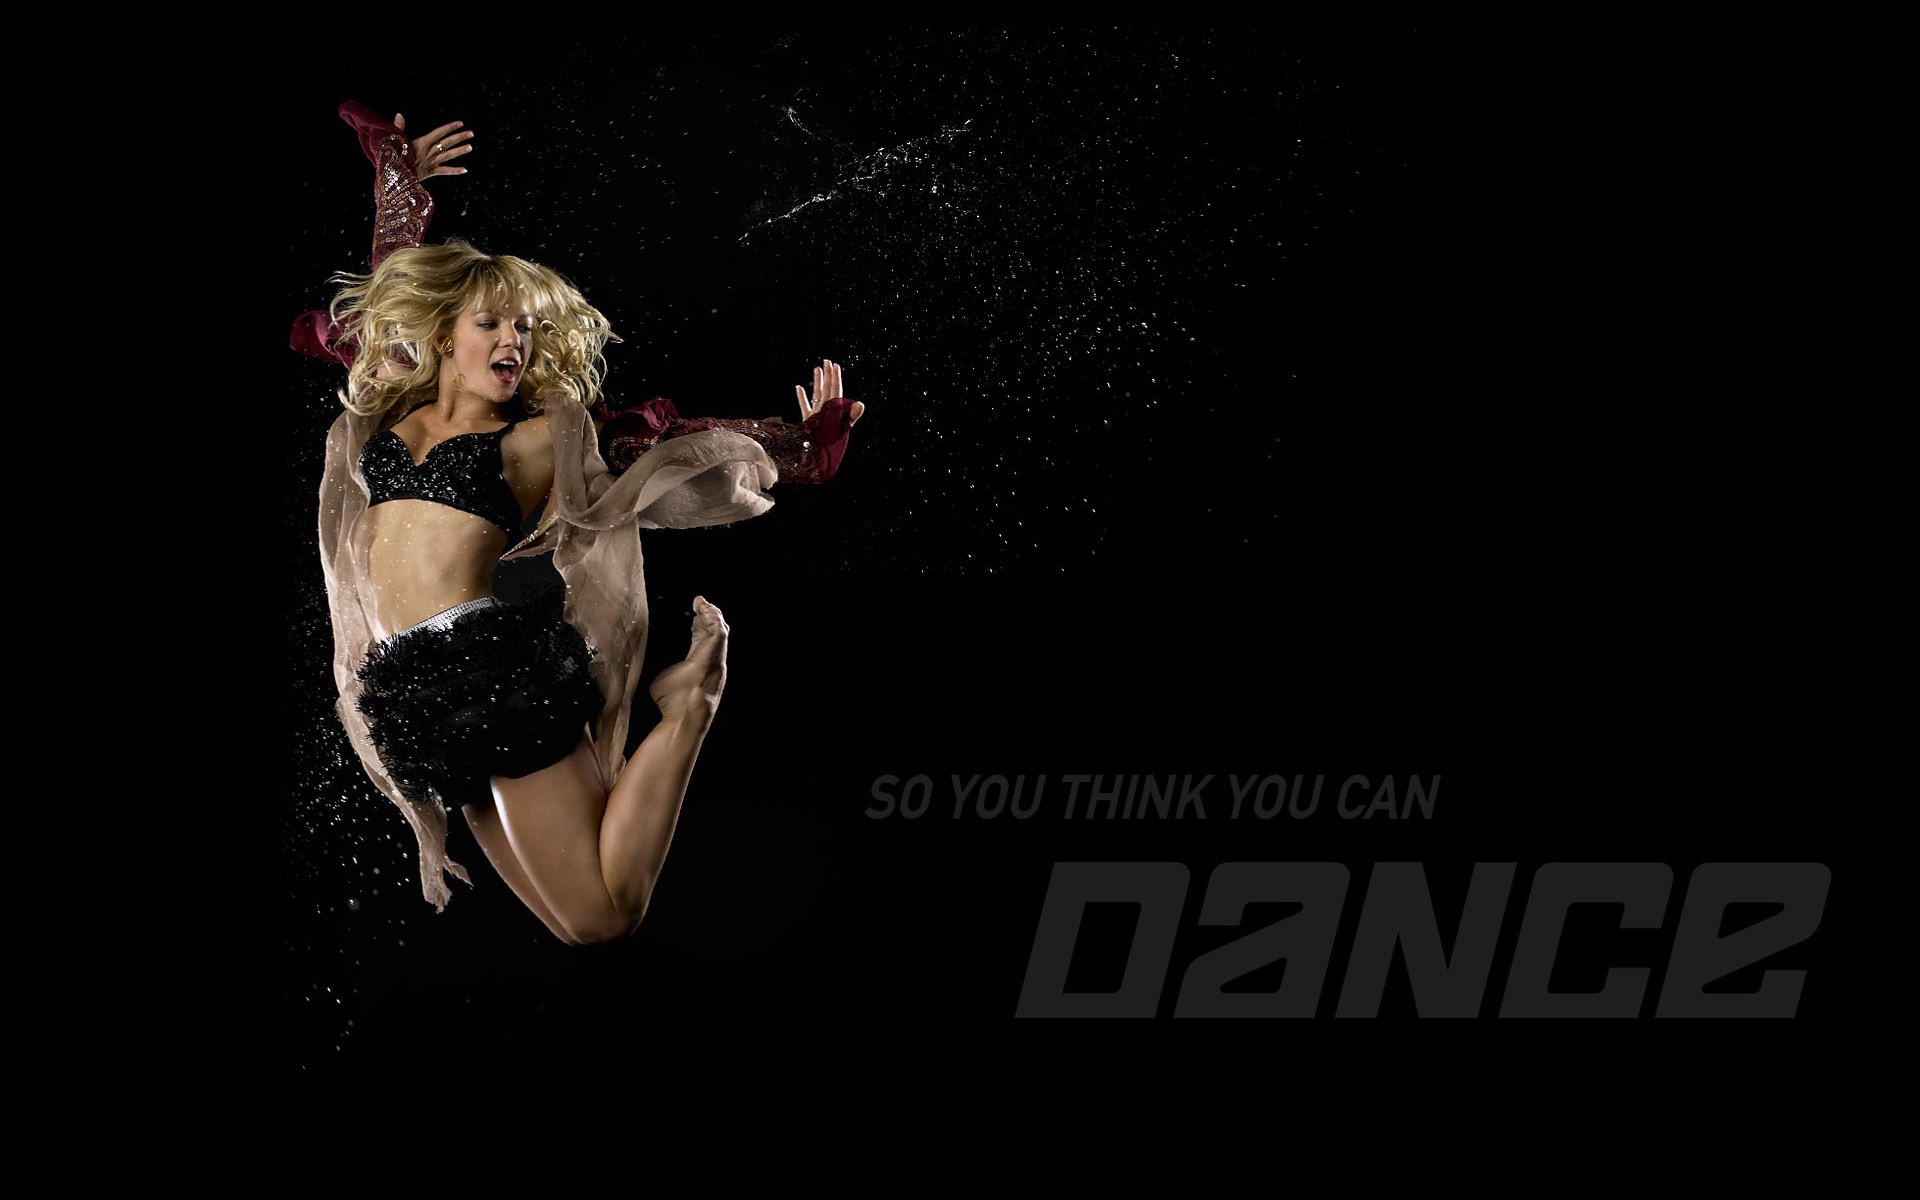 So You Think You Can Dance wallpaper (1) #7 - 1920x1200